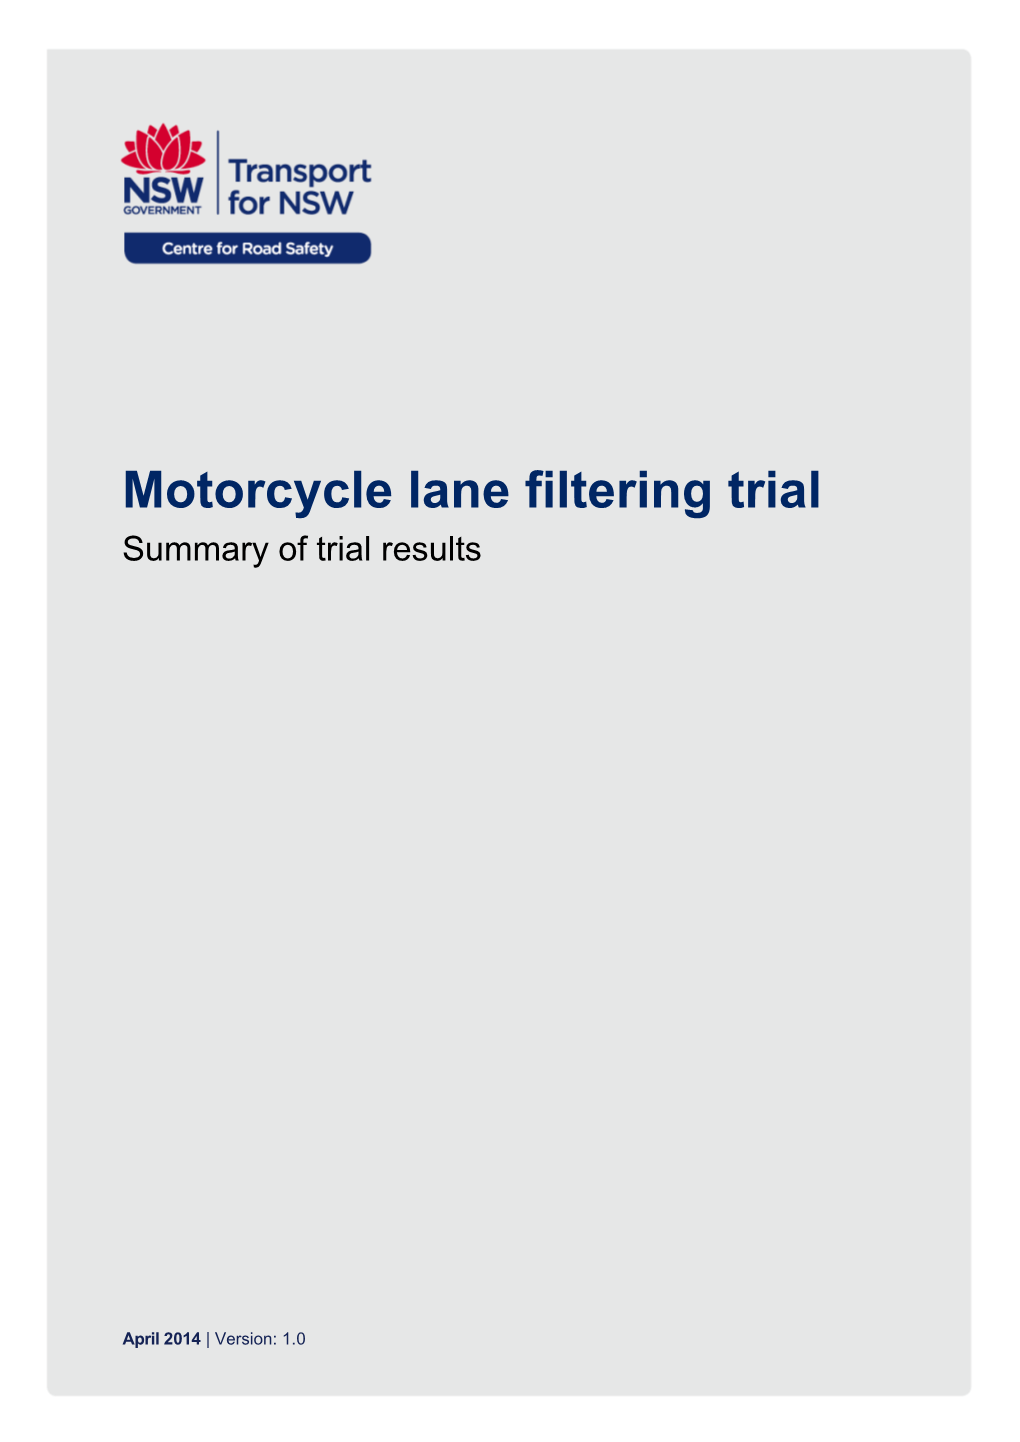 Motorcycle Lane Filtering Trial Summary of Trial Results